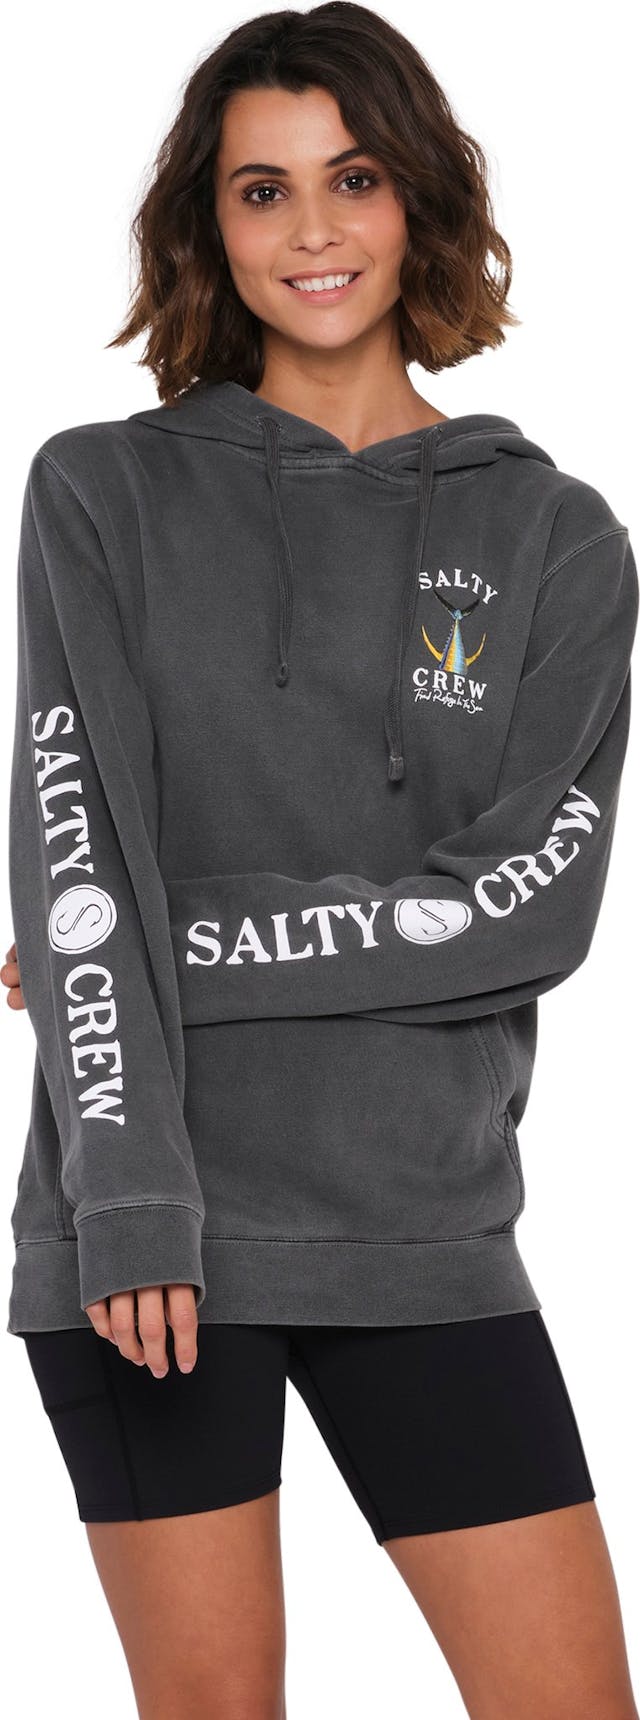 Women's Salty Crew Shirts, New & Used